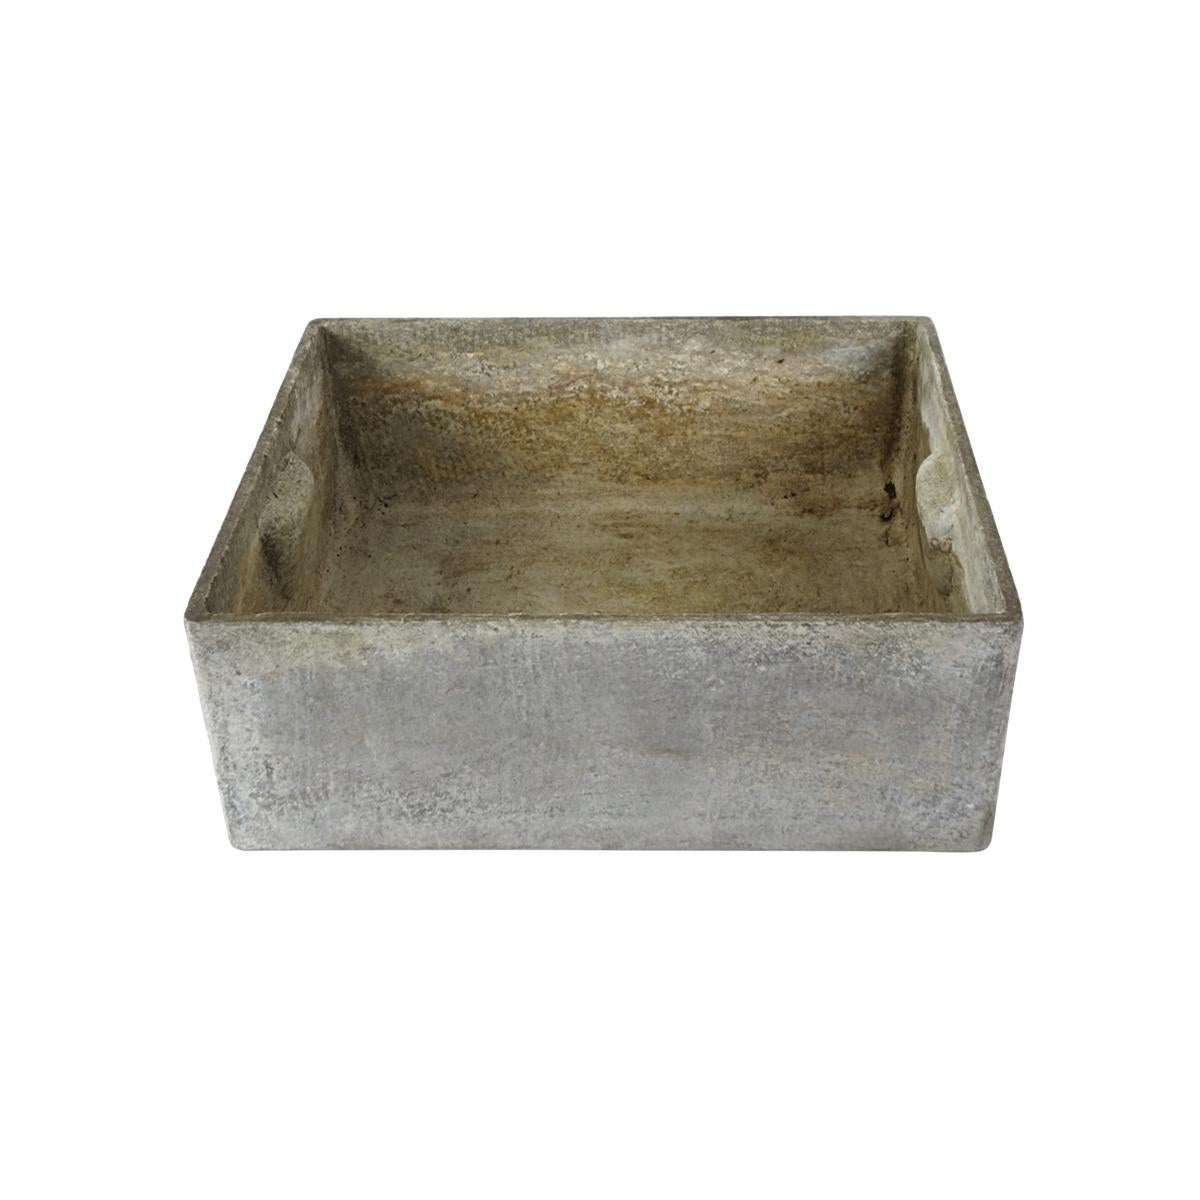 Mid-20th Century Mid-Century Modern Flat Planter by Willy Guhl for Eternit For Sale